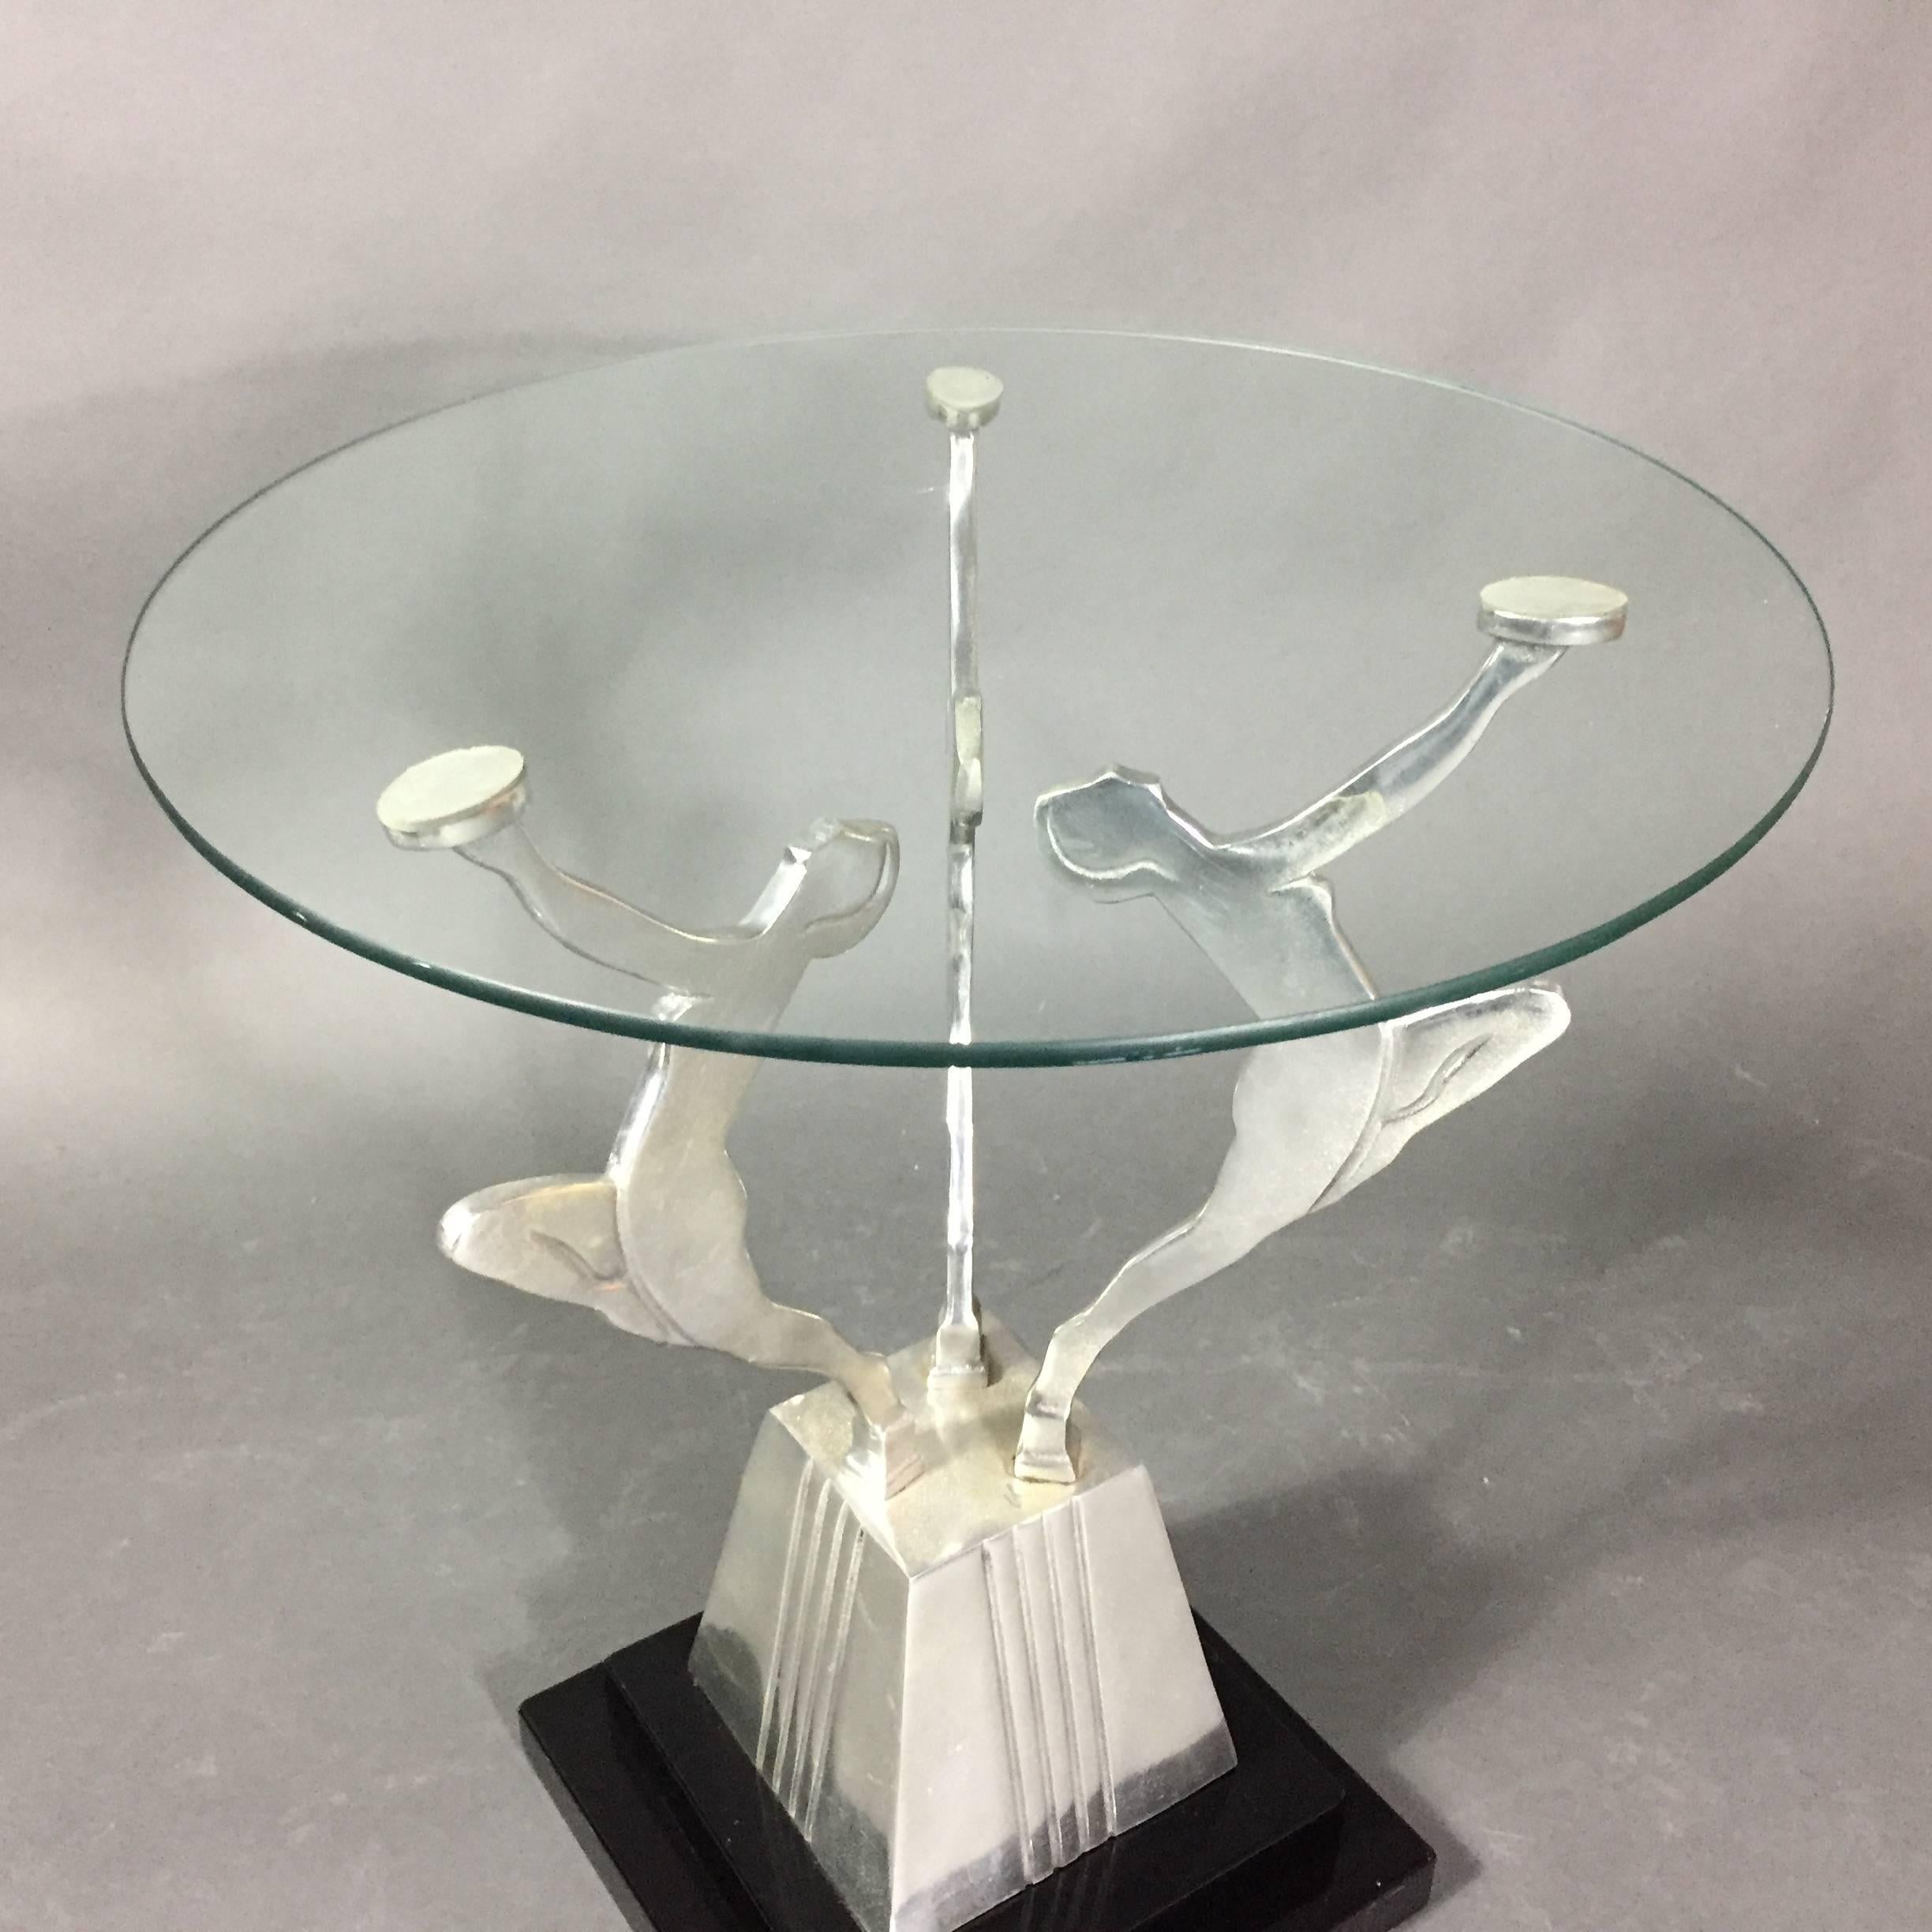 Art Deco Figural Metal Cocktail Table, USA, 1950s For Sale 2